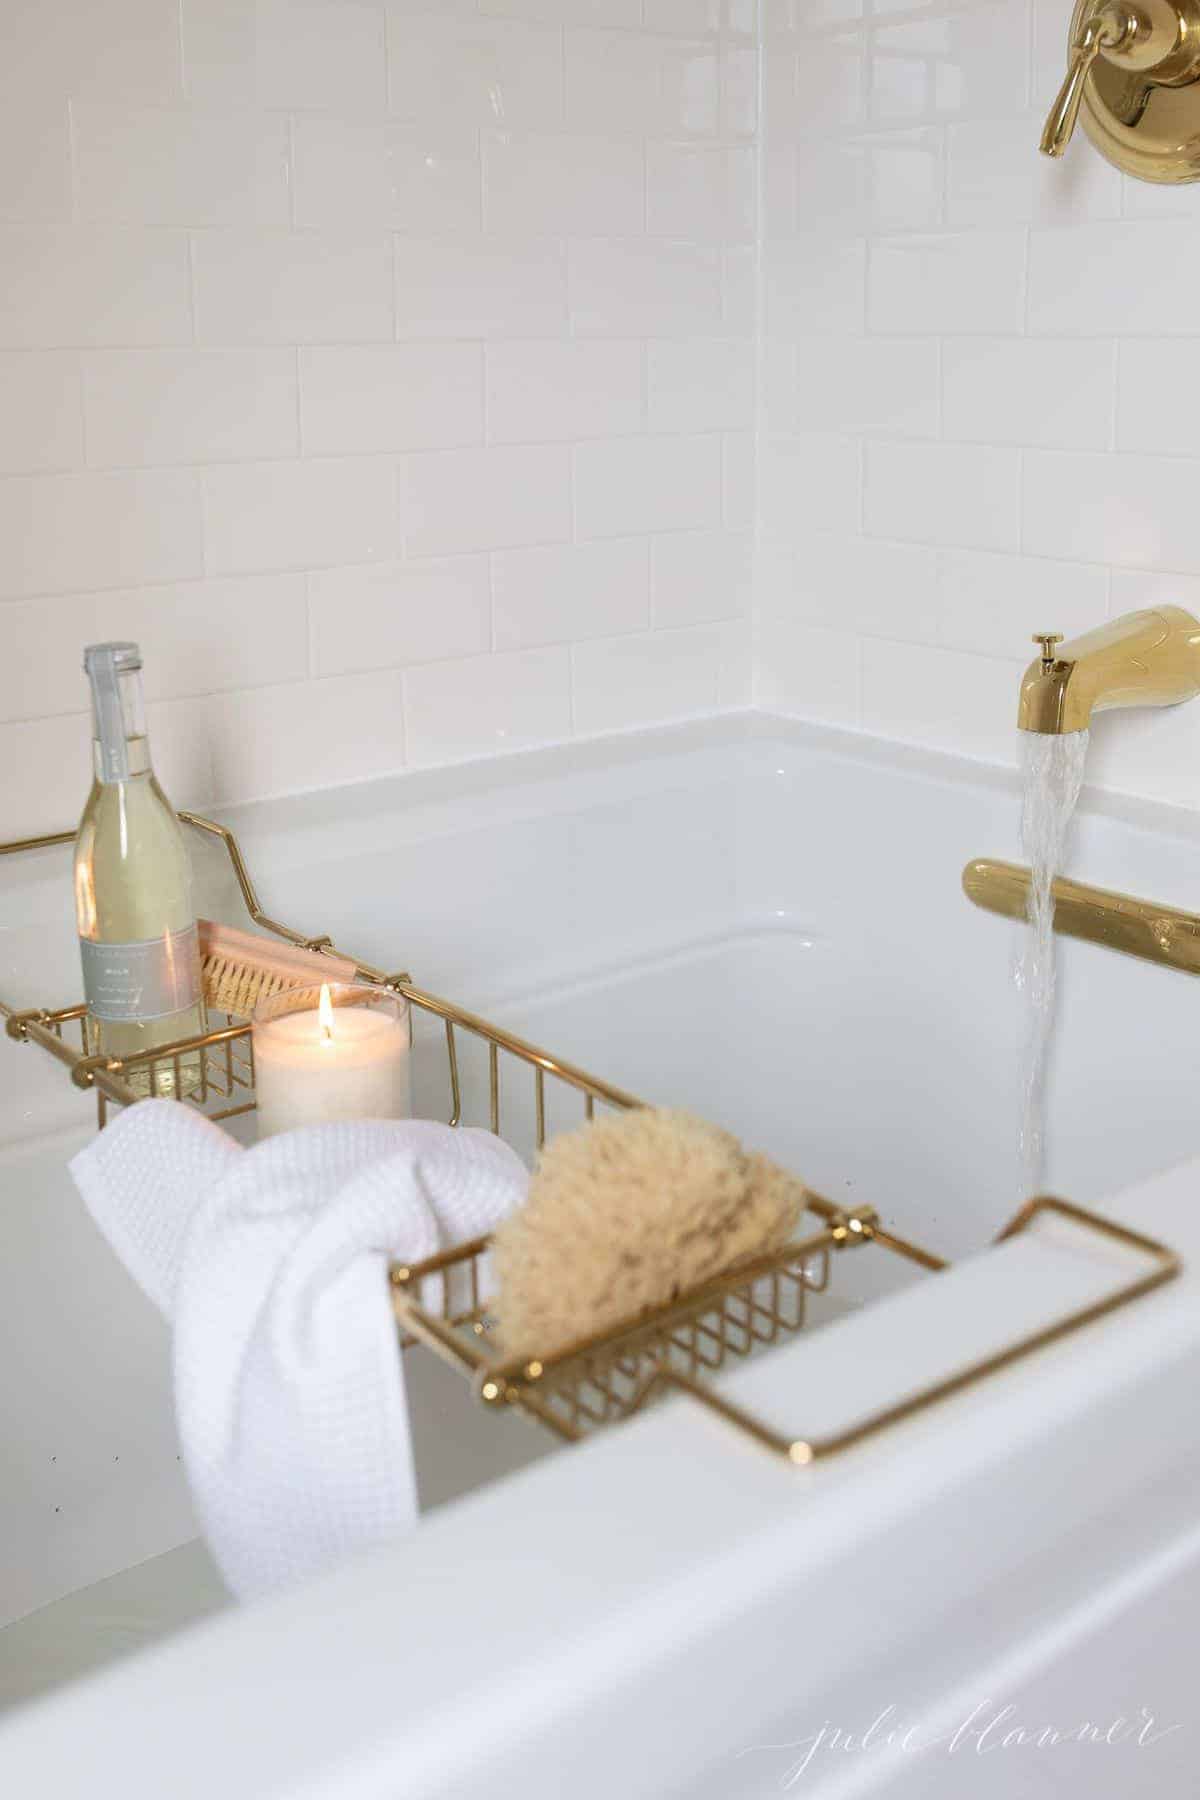 Air tub with brass bath fittings and a brass bath tray filled with relaxing spa treatments. #spabath #spatub